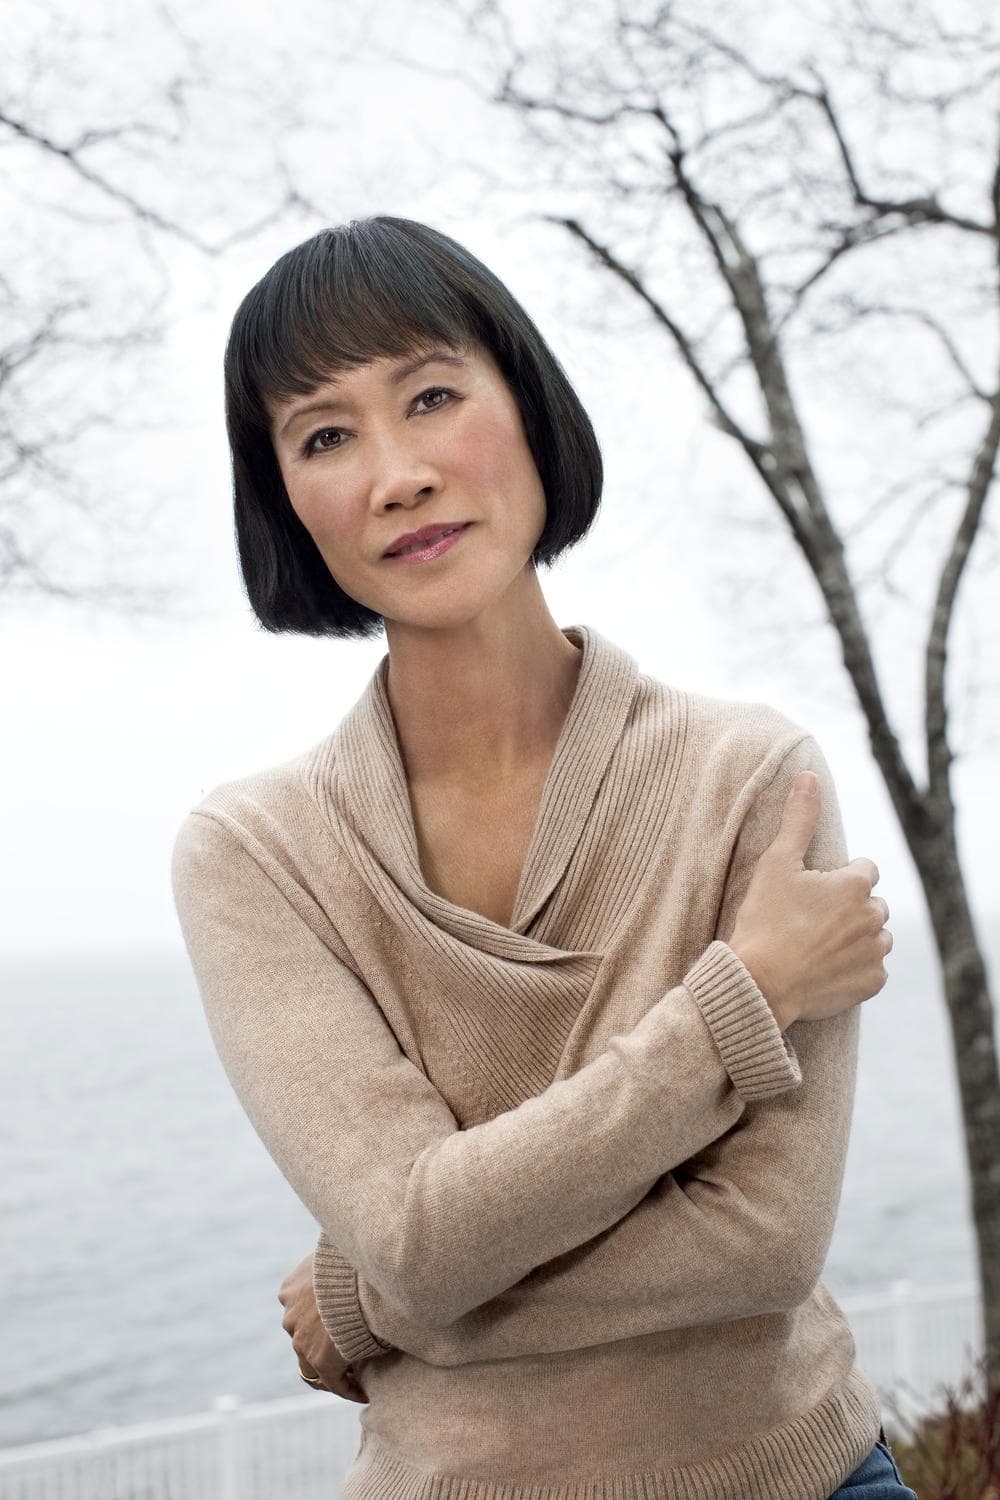 Tess Gerritsen author of 'The Silent Girl.' (Photo by Jessica Hill)